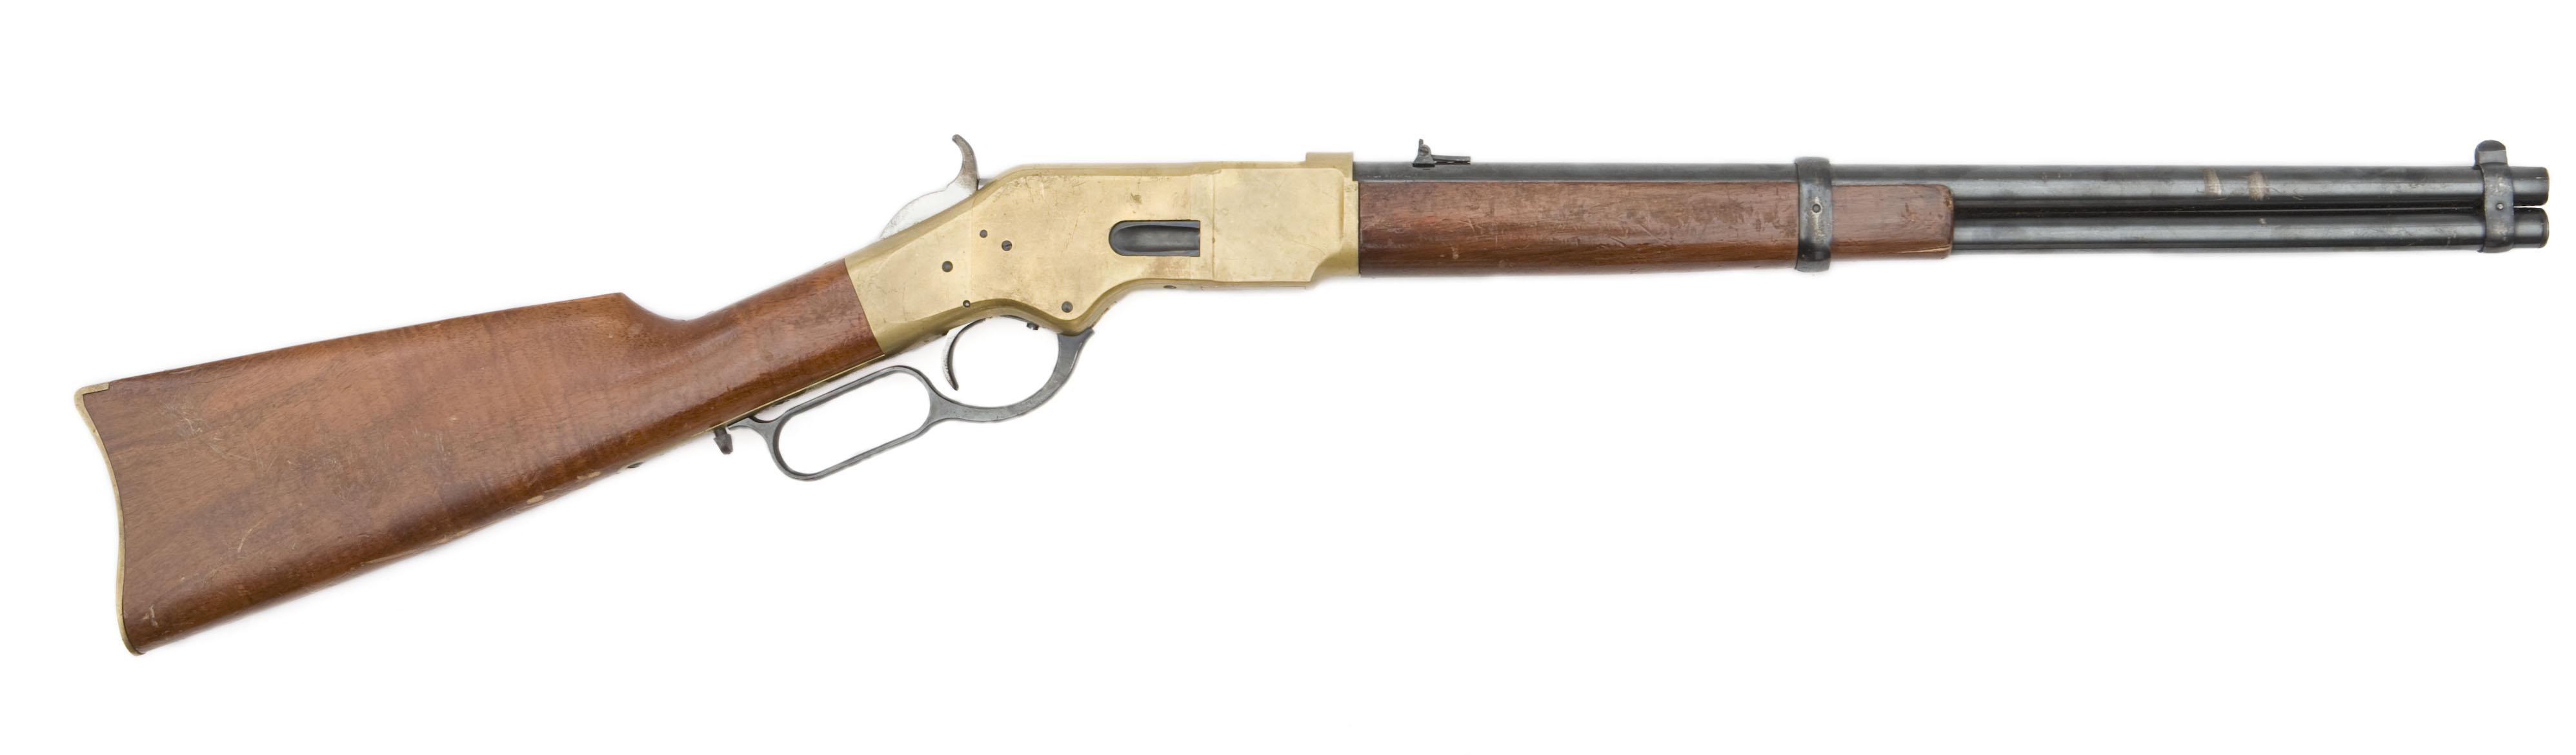 Winchester Rifle #28